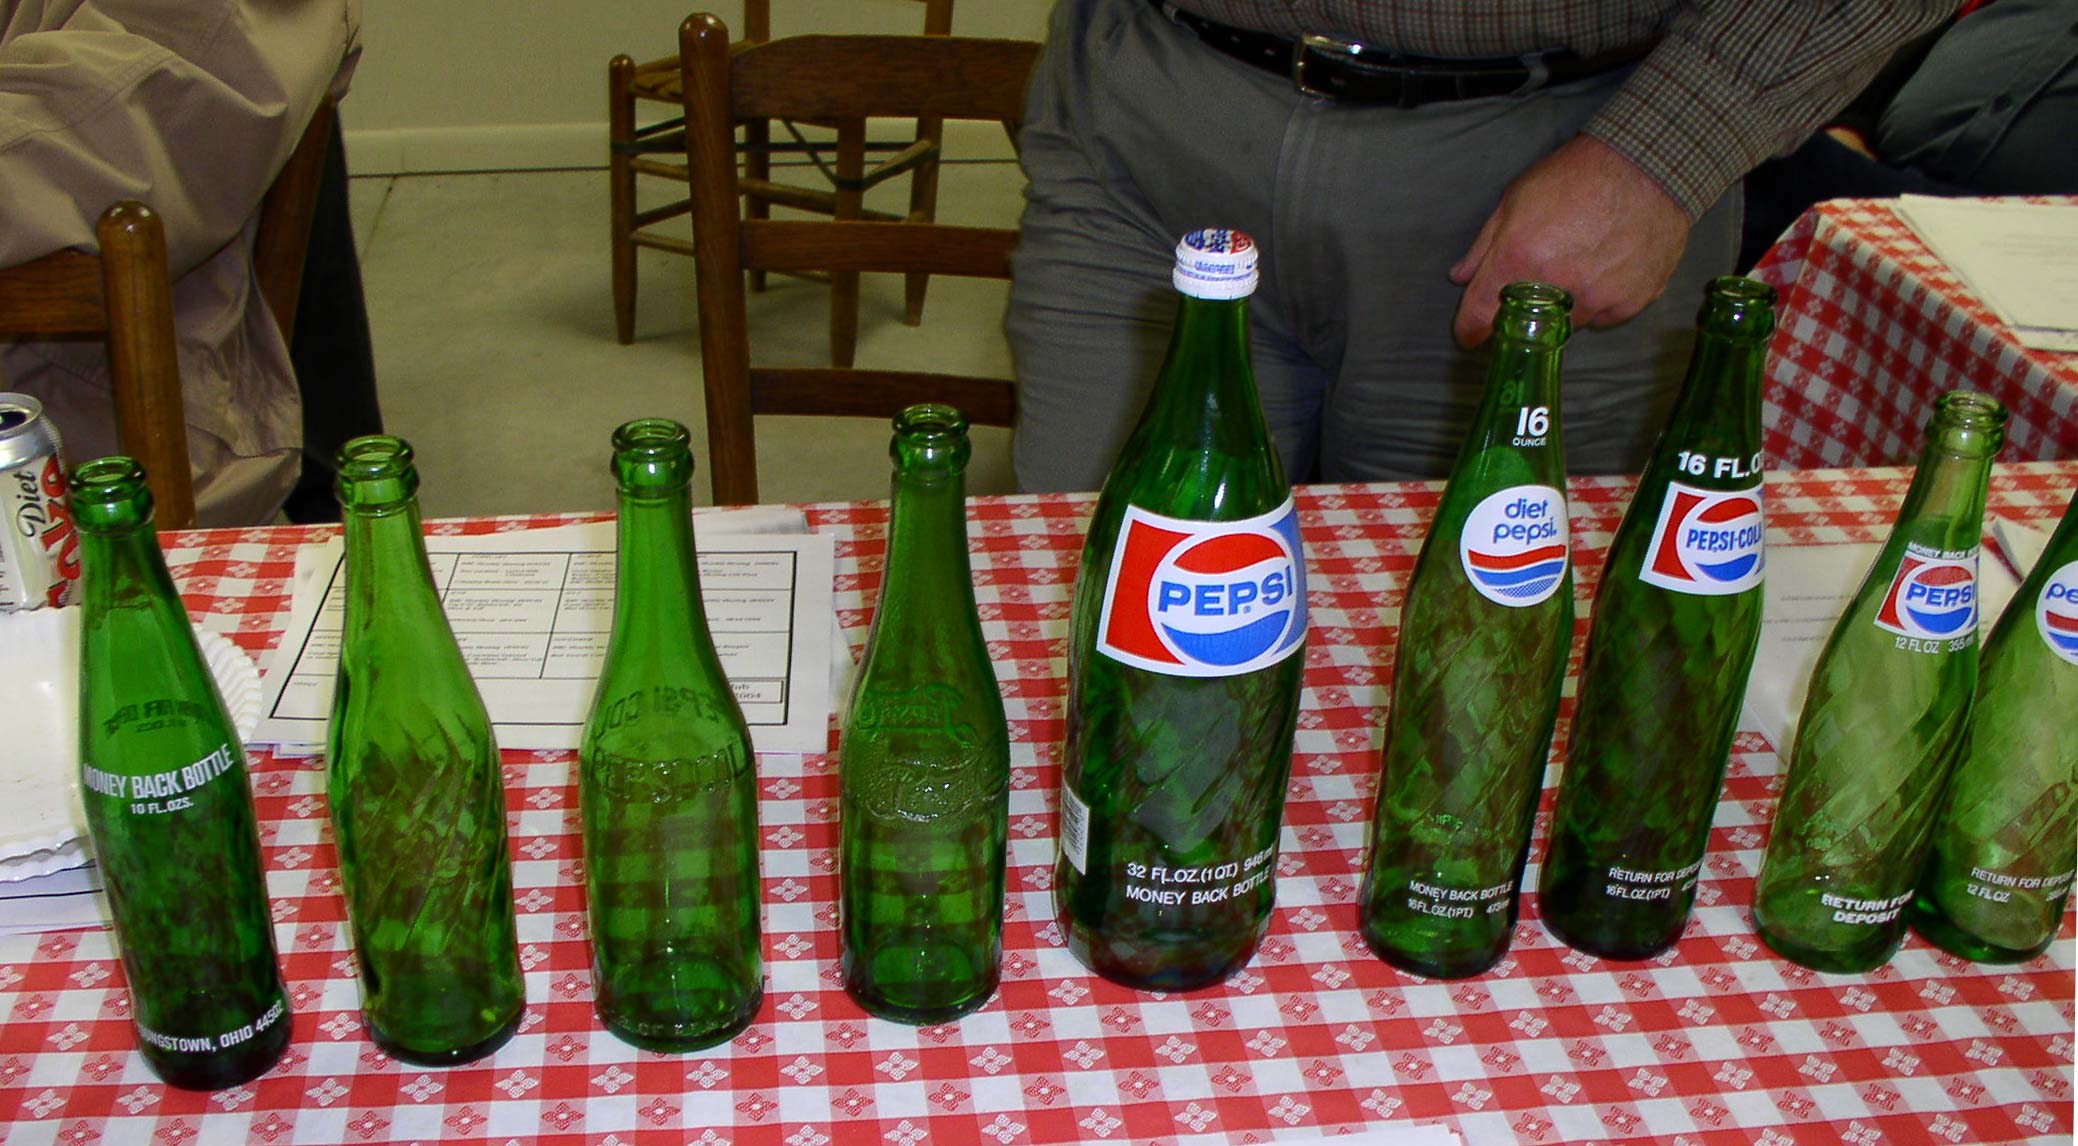 Here is a pic of some of the other Pepsi green glass. 